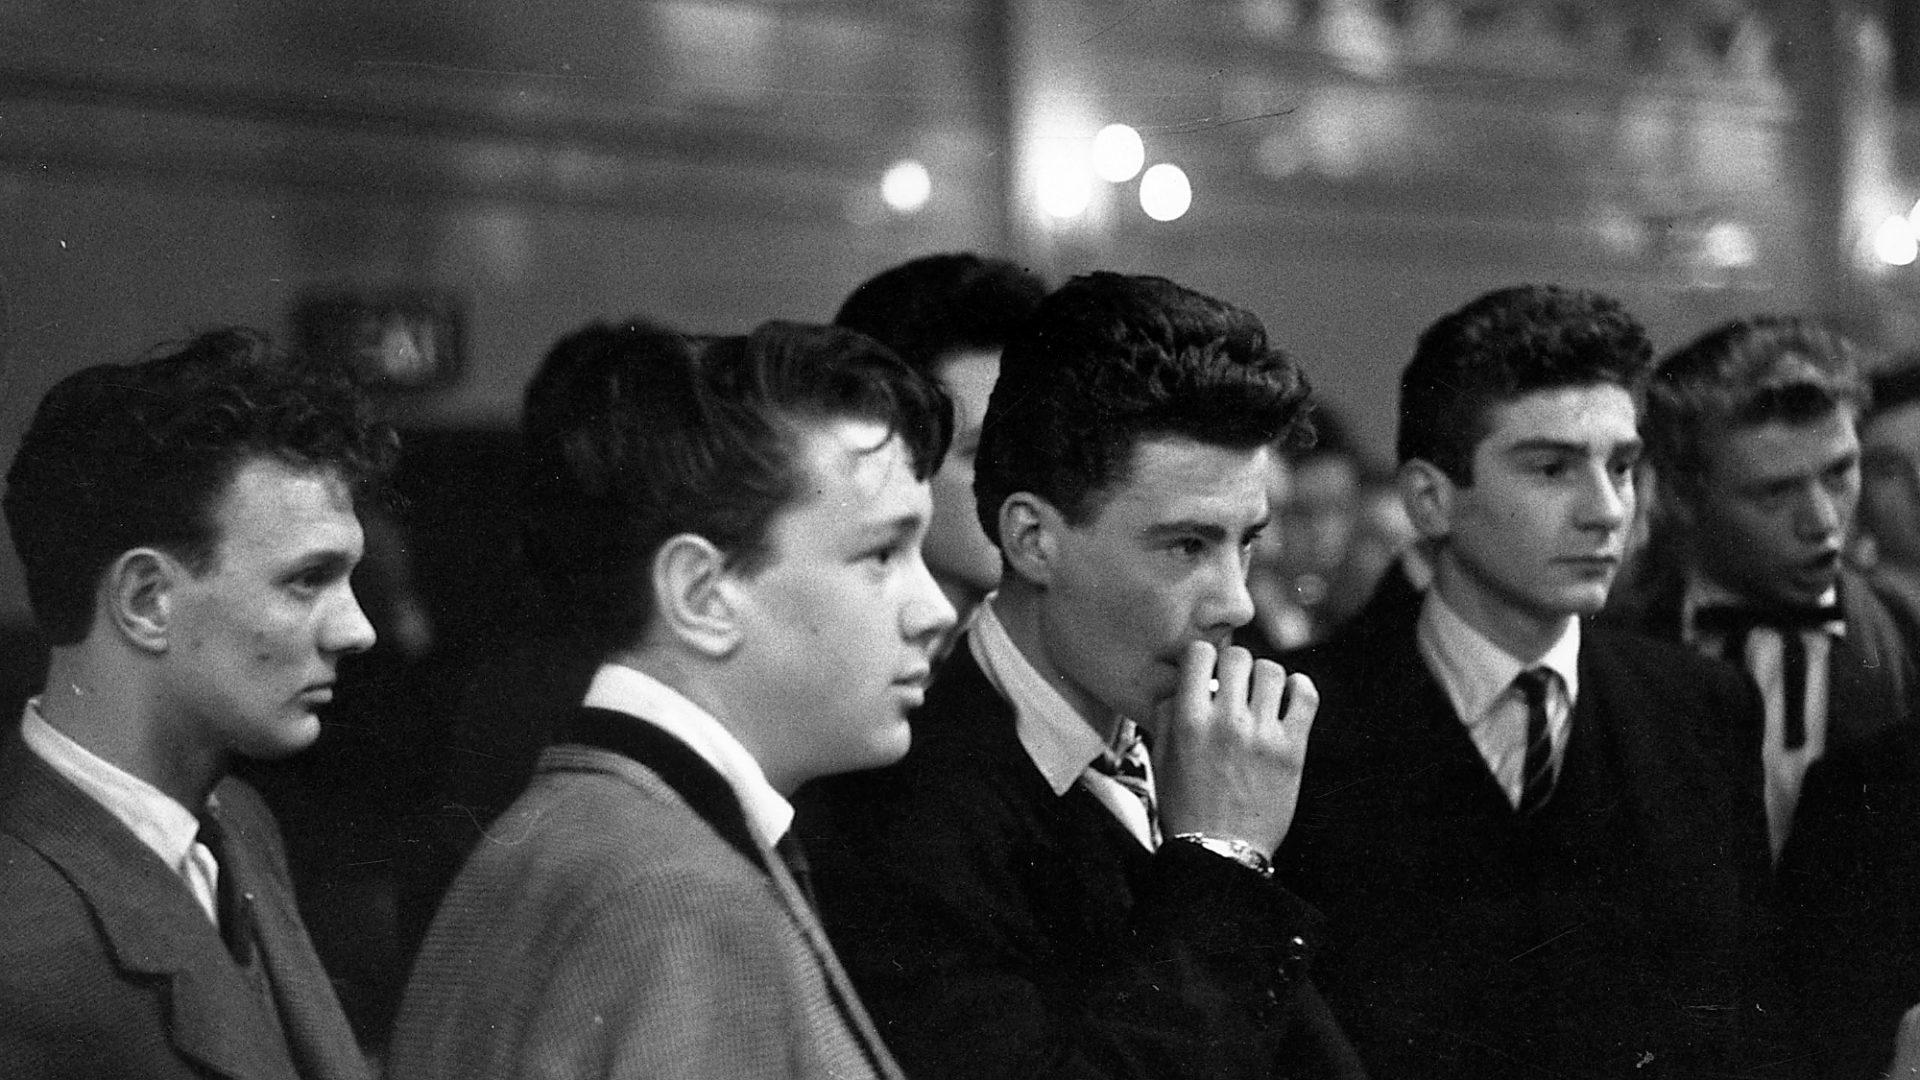 A group of Teddy Boys enjoy an evening out at the Mecca Dance Hall in Tottenham in May 1954. Photo: Alex Dellow/Picture Post/Hulton Archive/Getty